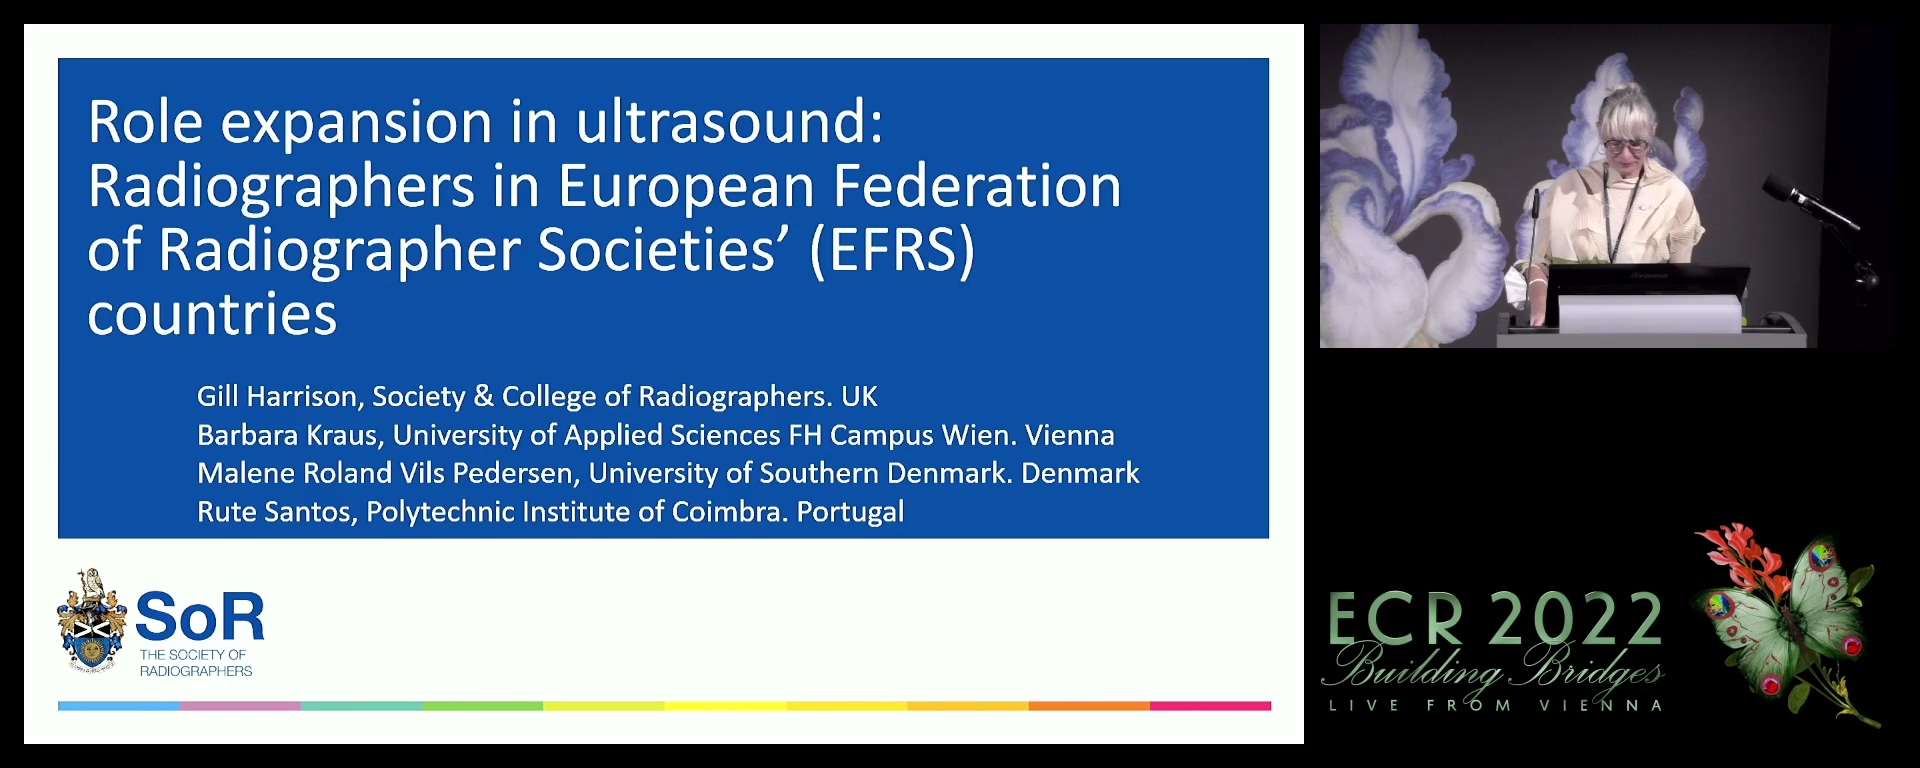 Role expansion in ultrasound: radiographers in European Federation of Radiographer Societies (EFRS) countries - Barbara Kraus, Wolkersdorf / AT